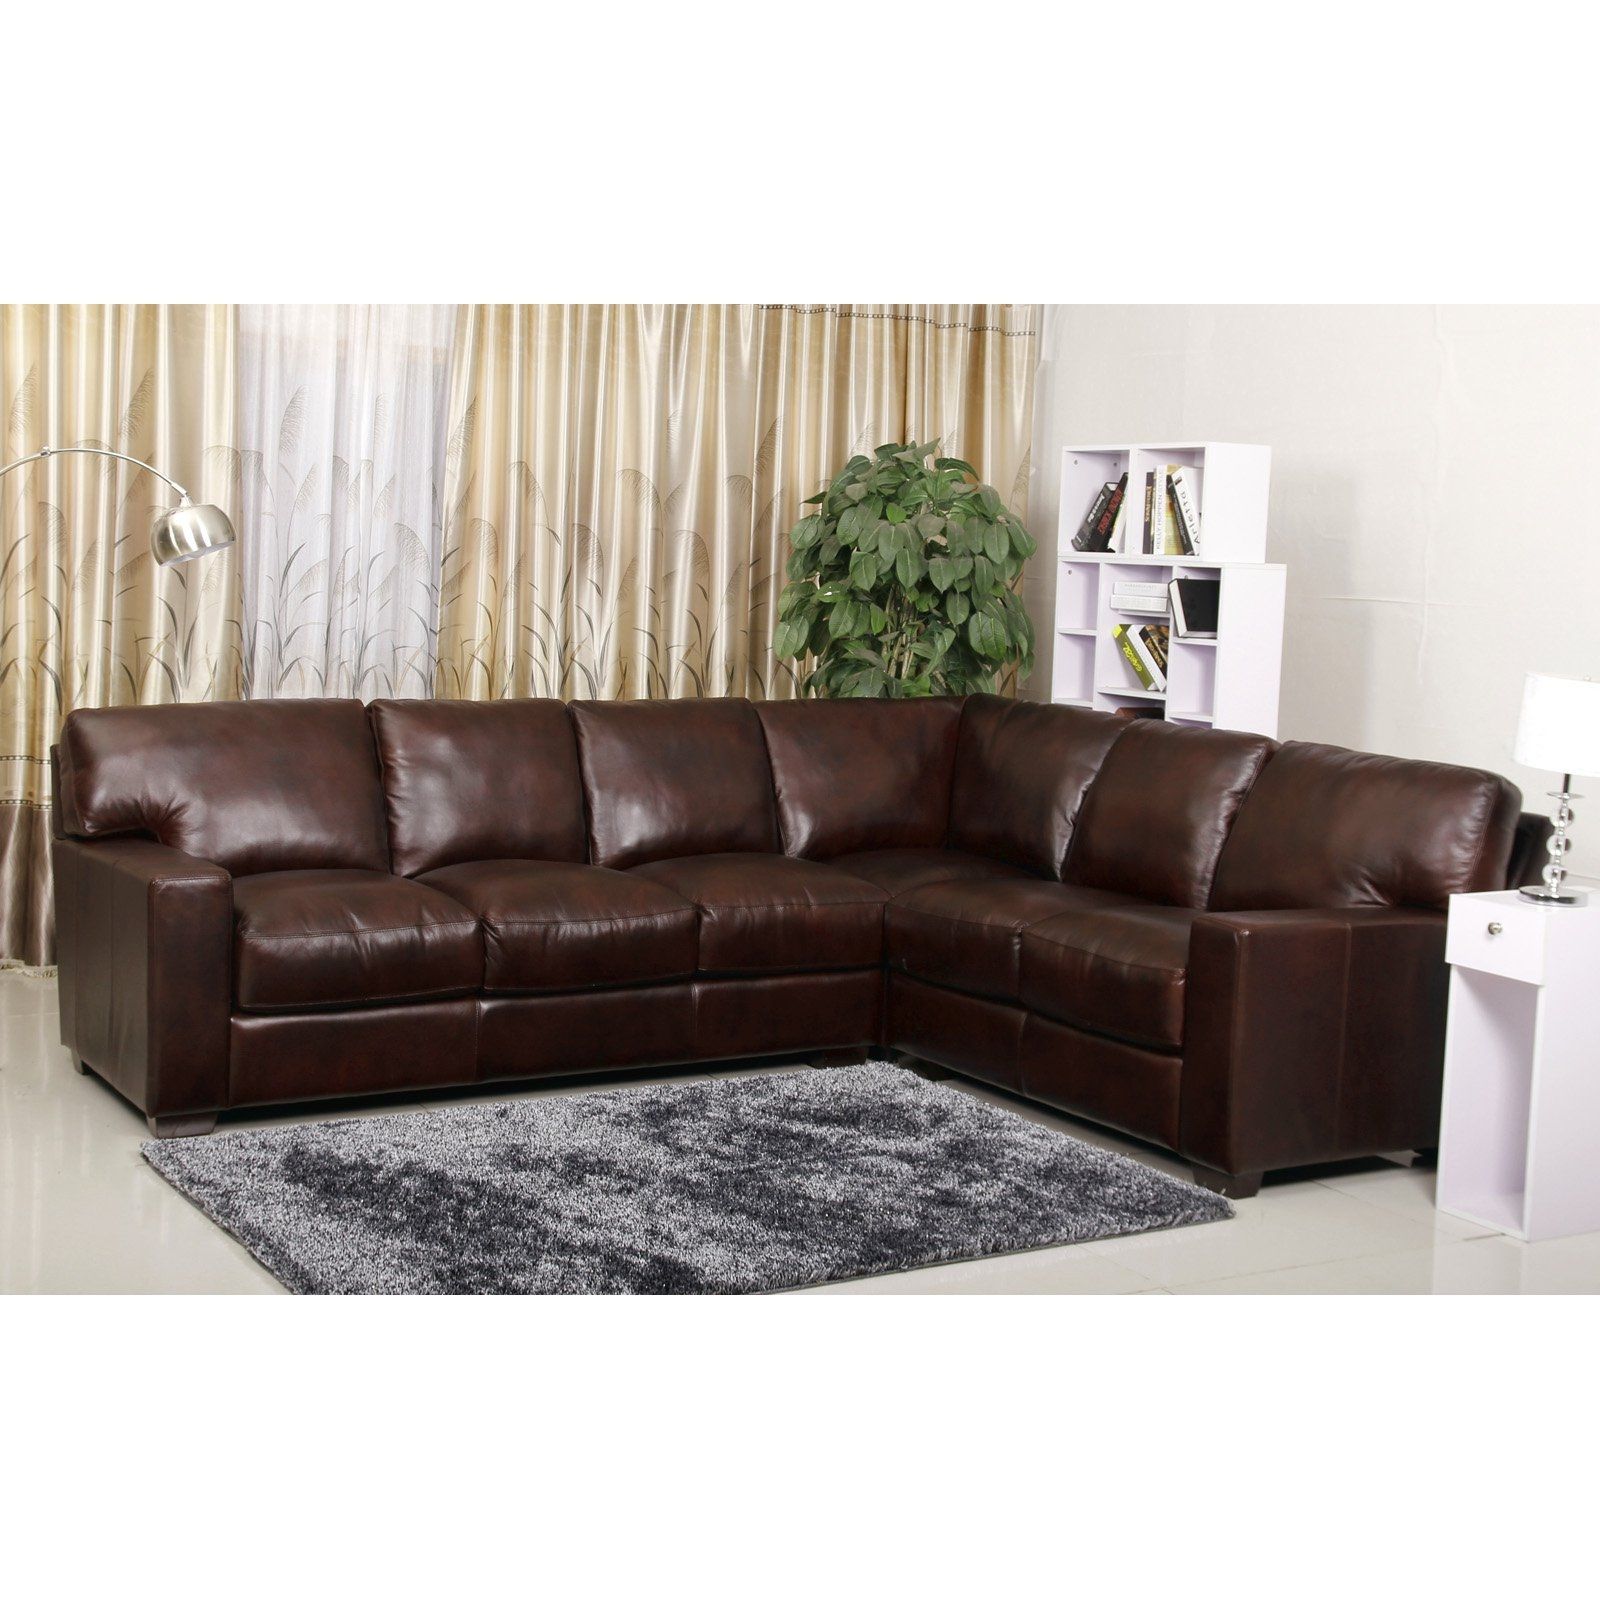 Abson Vana Premium Hand Rubbed Leather Sectional Sofa Two Tone Regarding Abbyson Sectional Sofa (View 2 of 12)